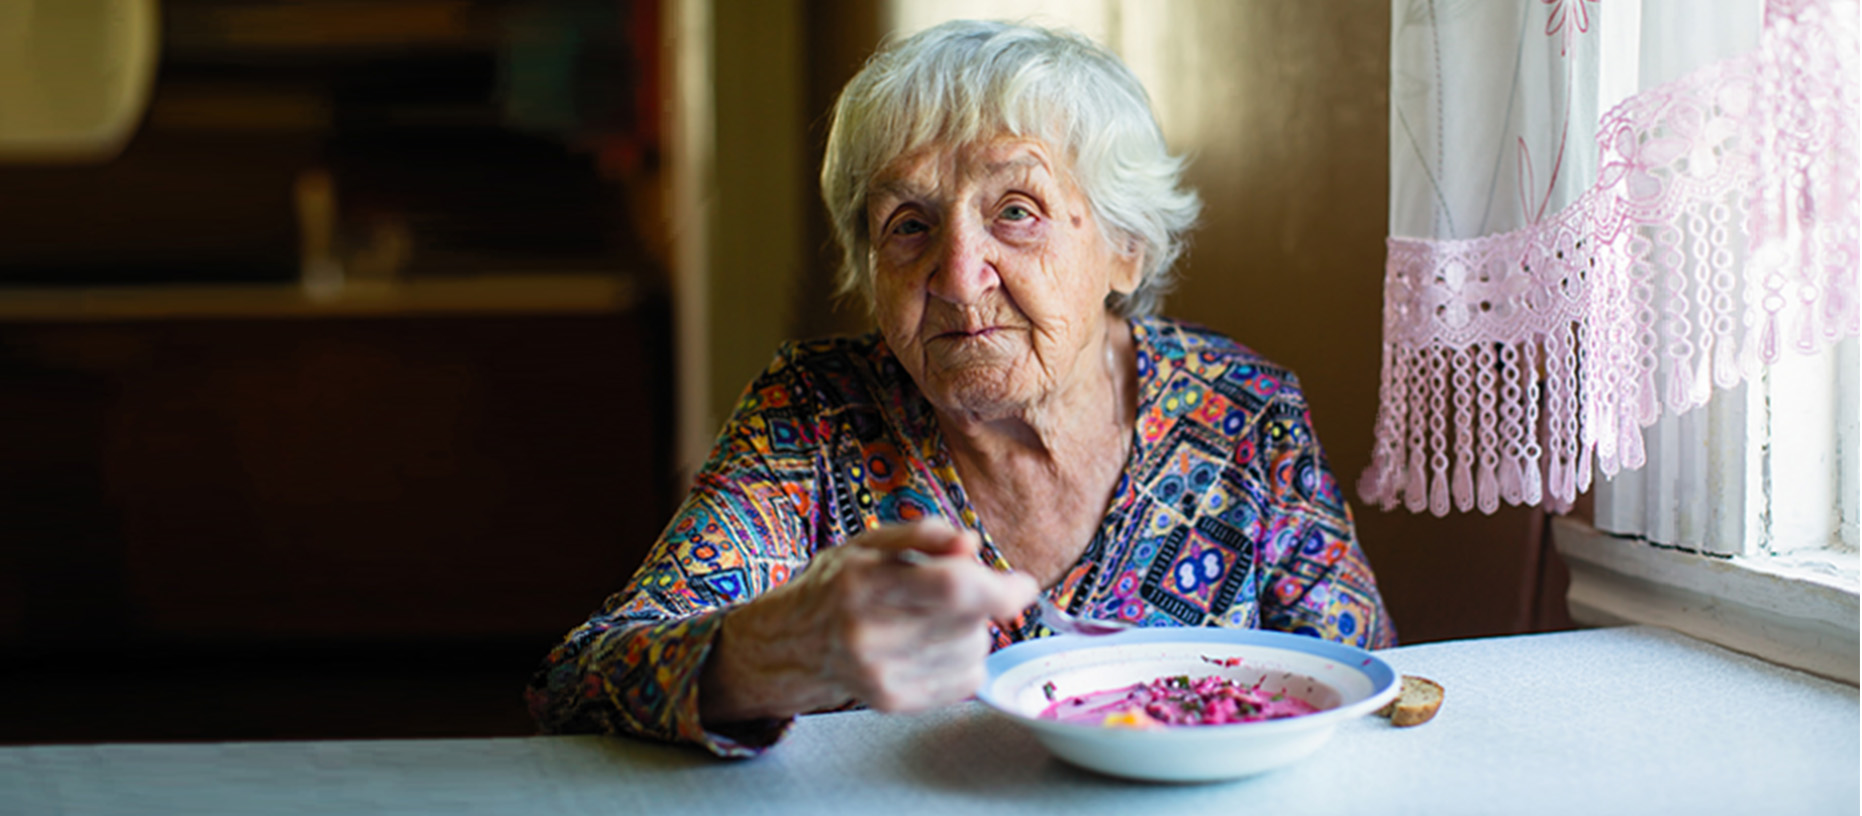 An older woman sits at a table in front of a bowl of food.